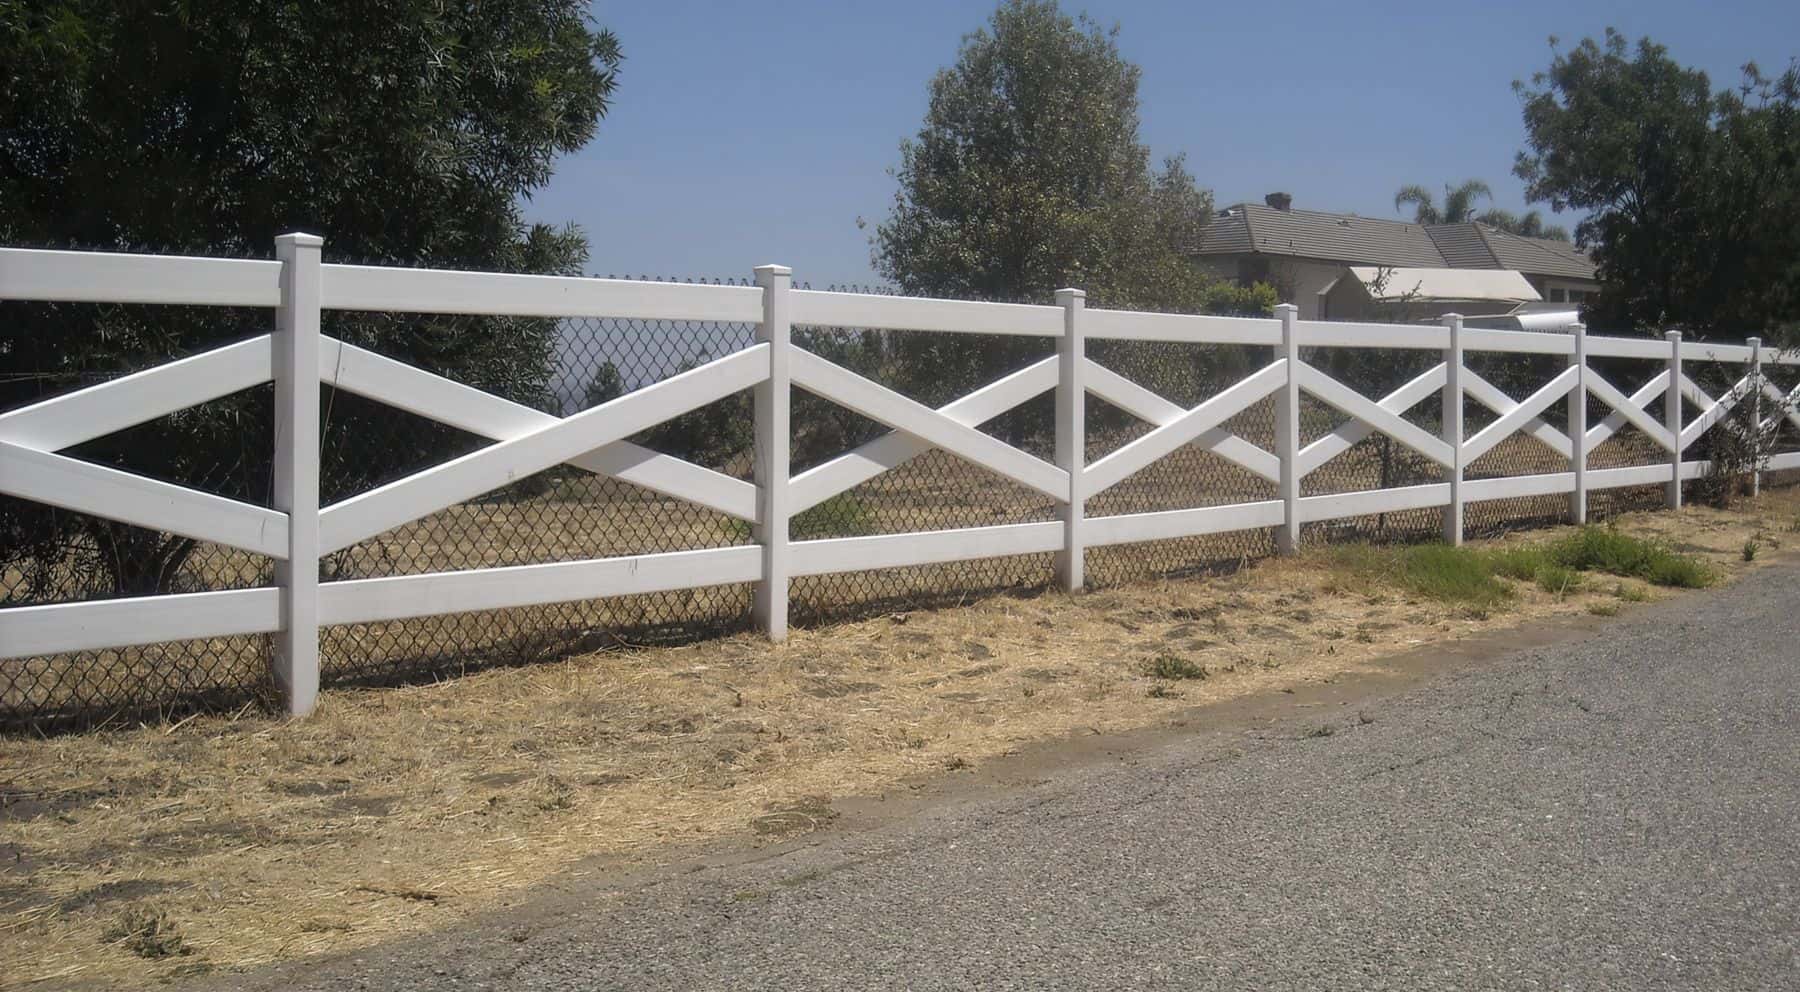 Vinyl cross rail ranch style fence beside the road with a chain link fence behind it to further discourage trespassing